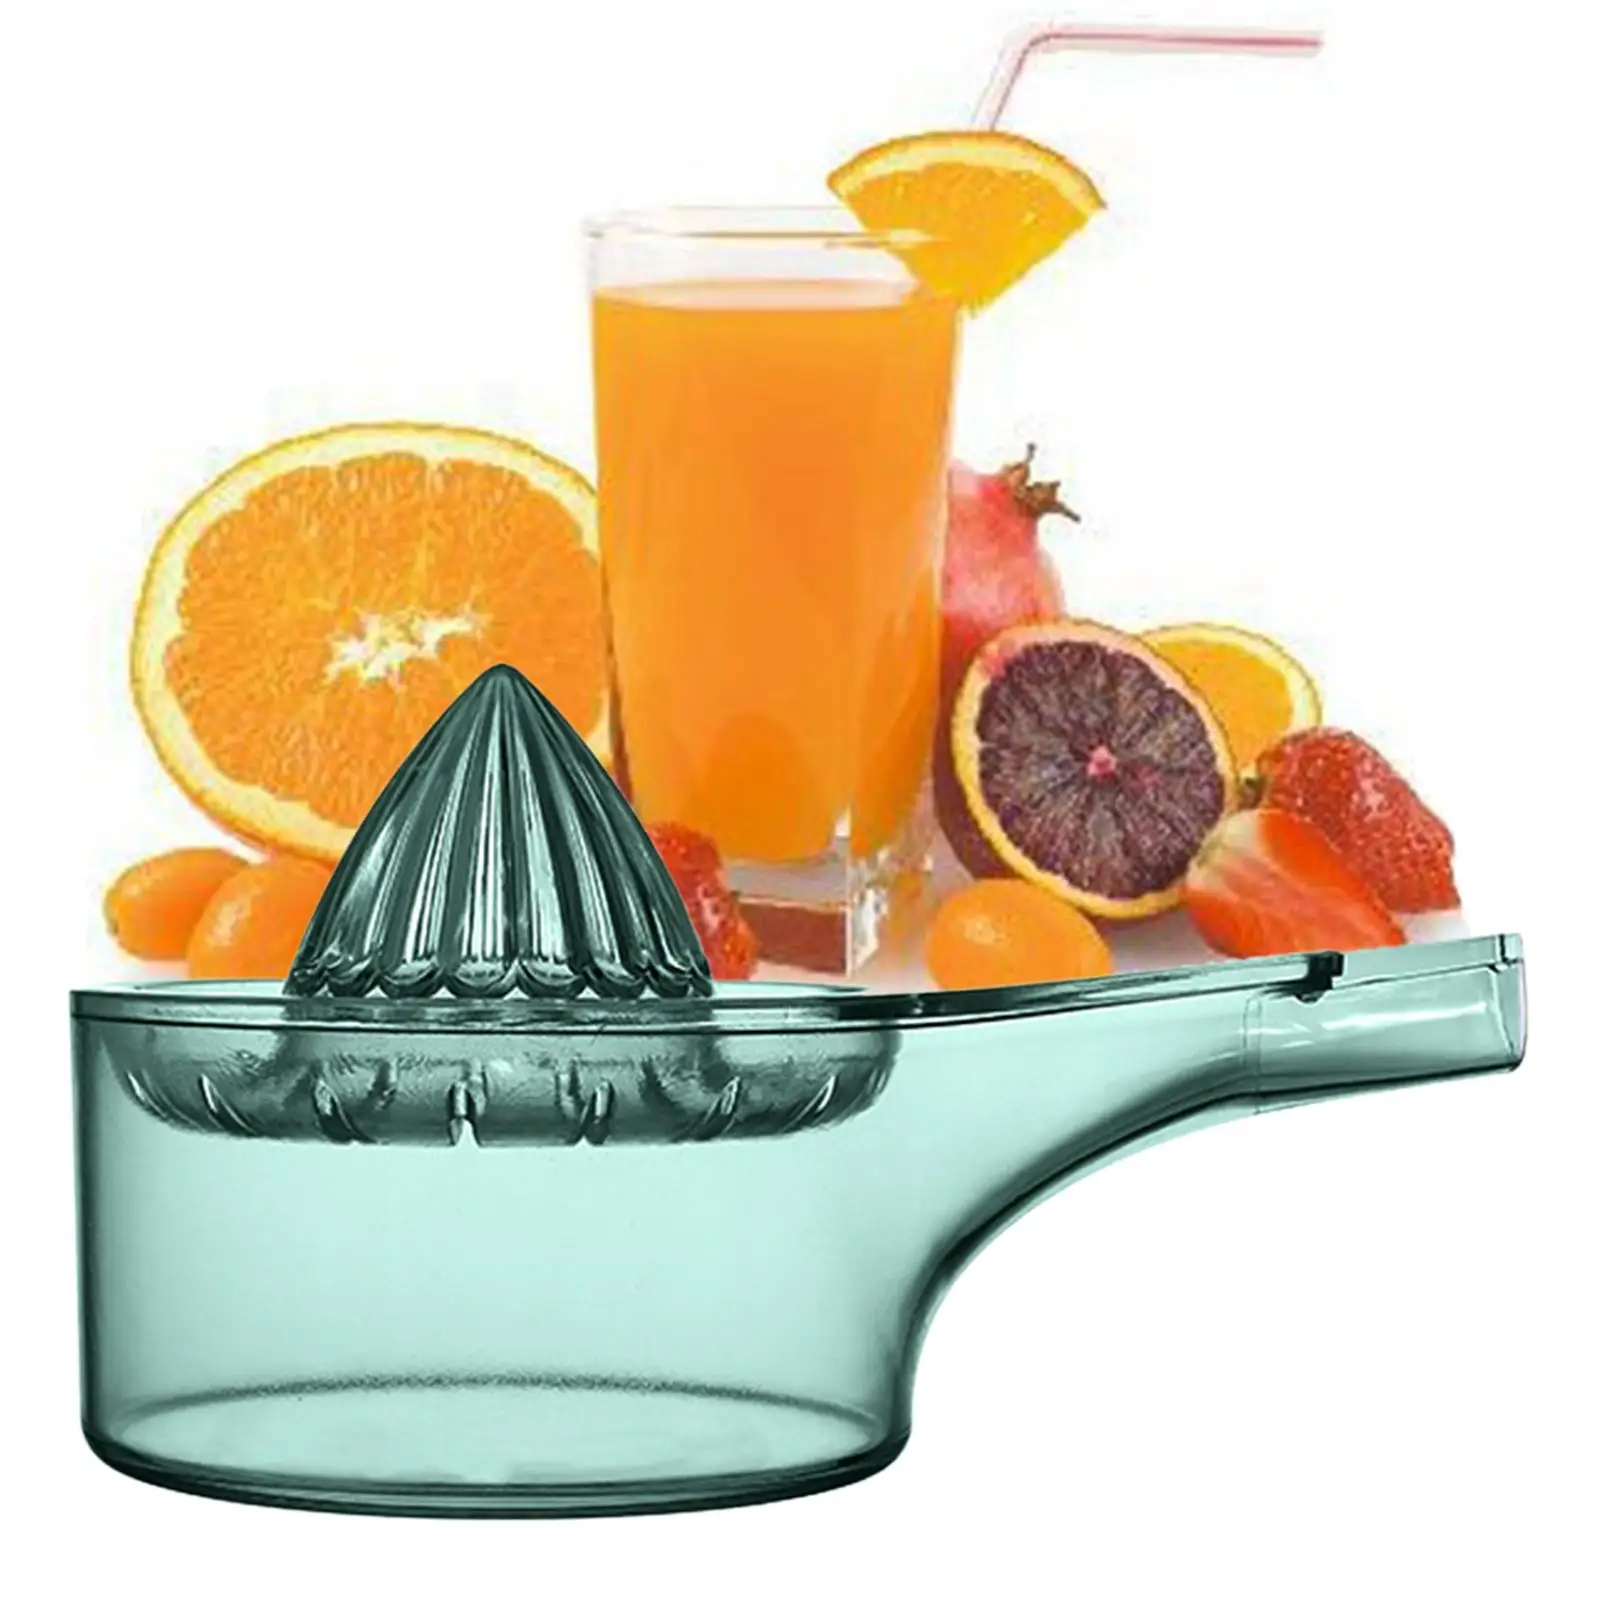 Manual Hand Lemon Orange Lime Juicer Spout Design for Pouring Juice 8.3Inchx4.7inch Also Ladle Use Transparent Body Easy Use